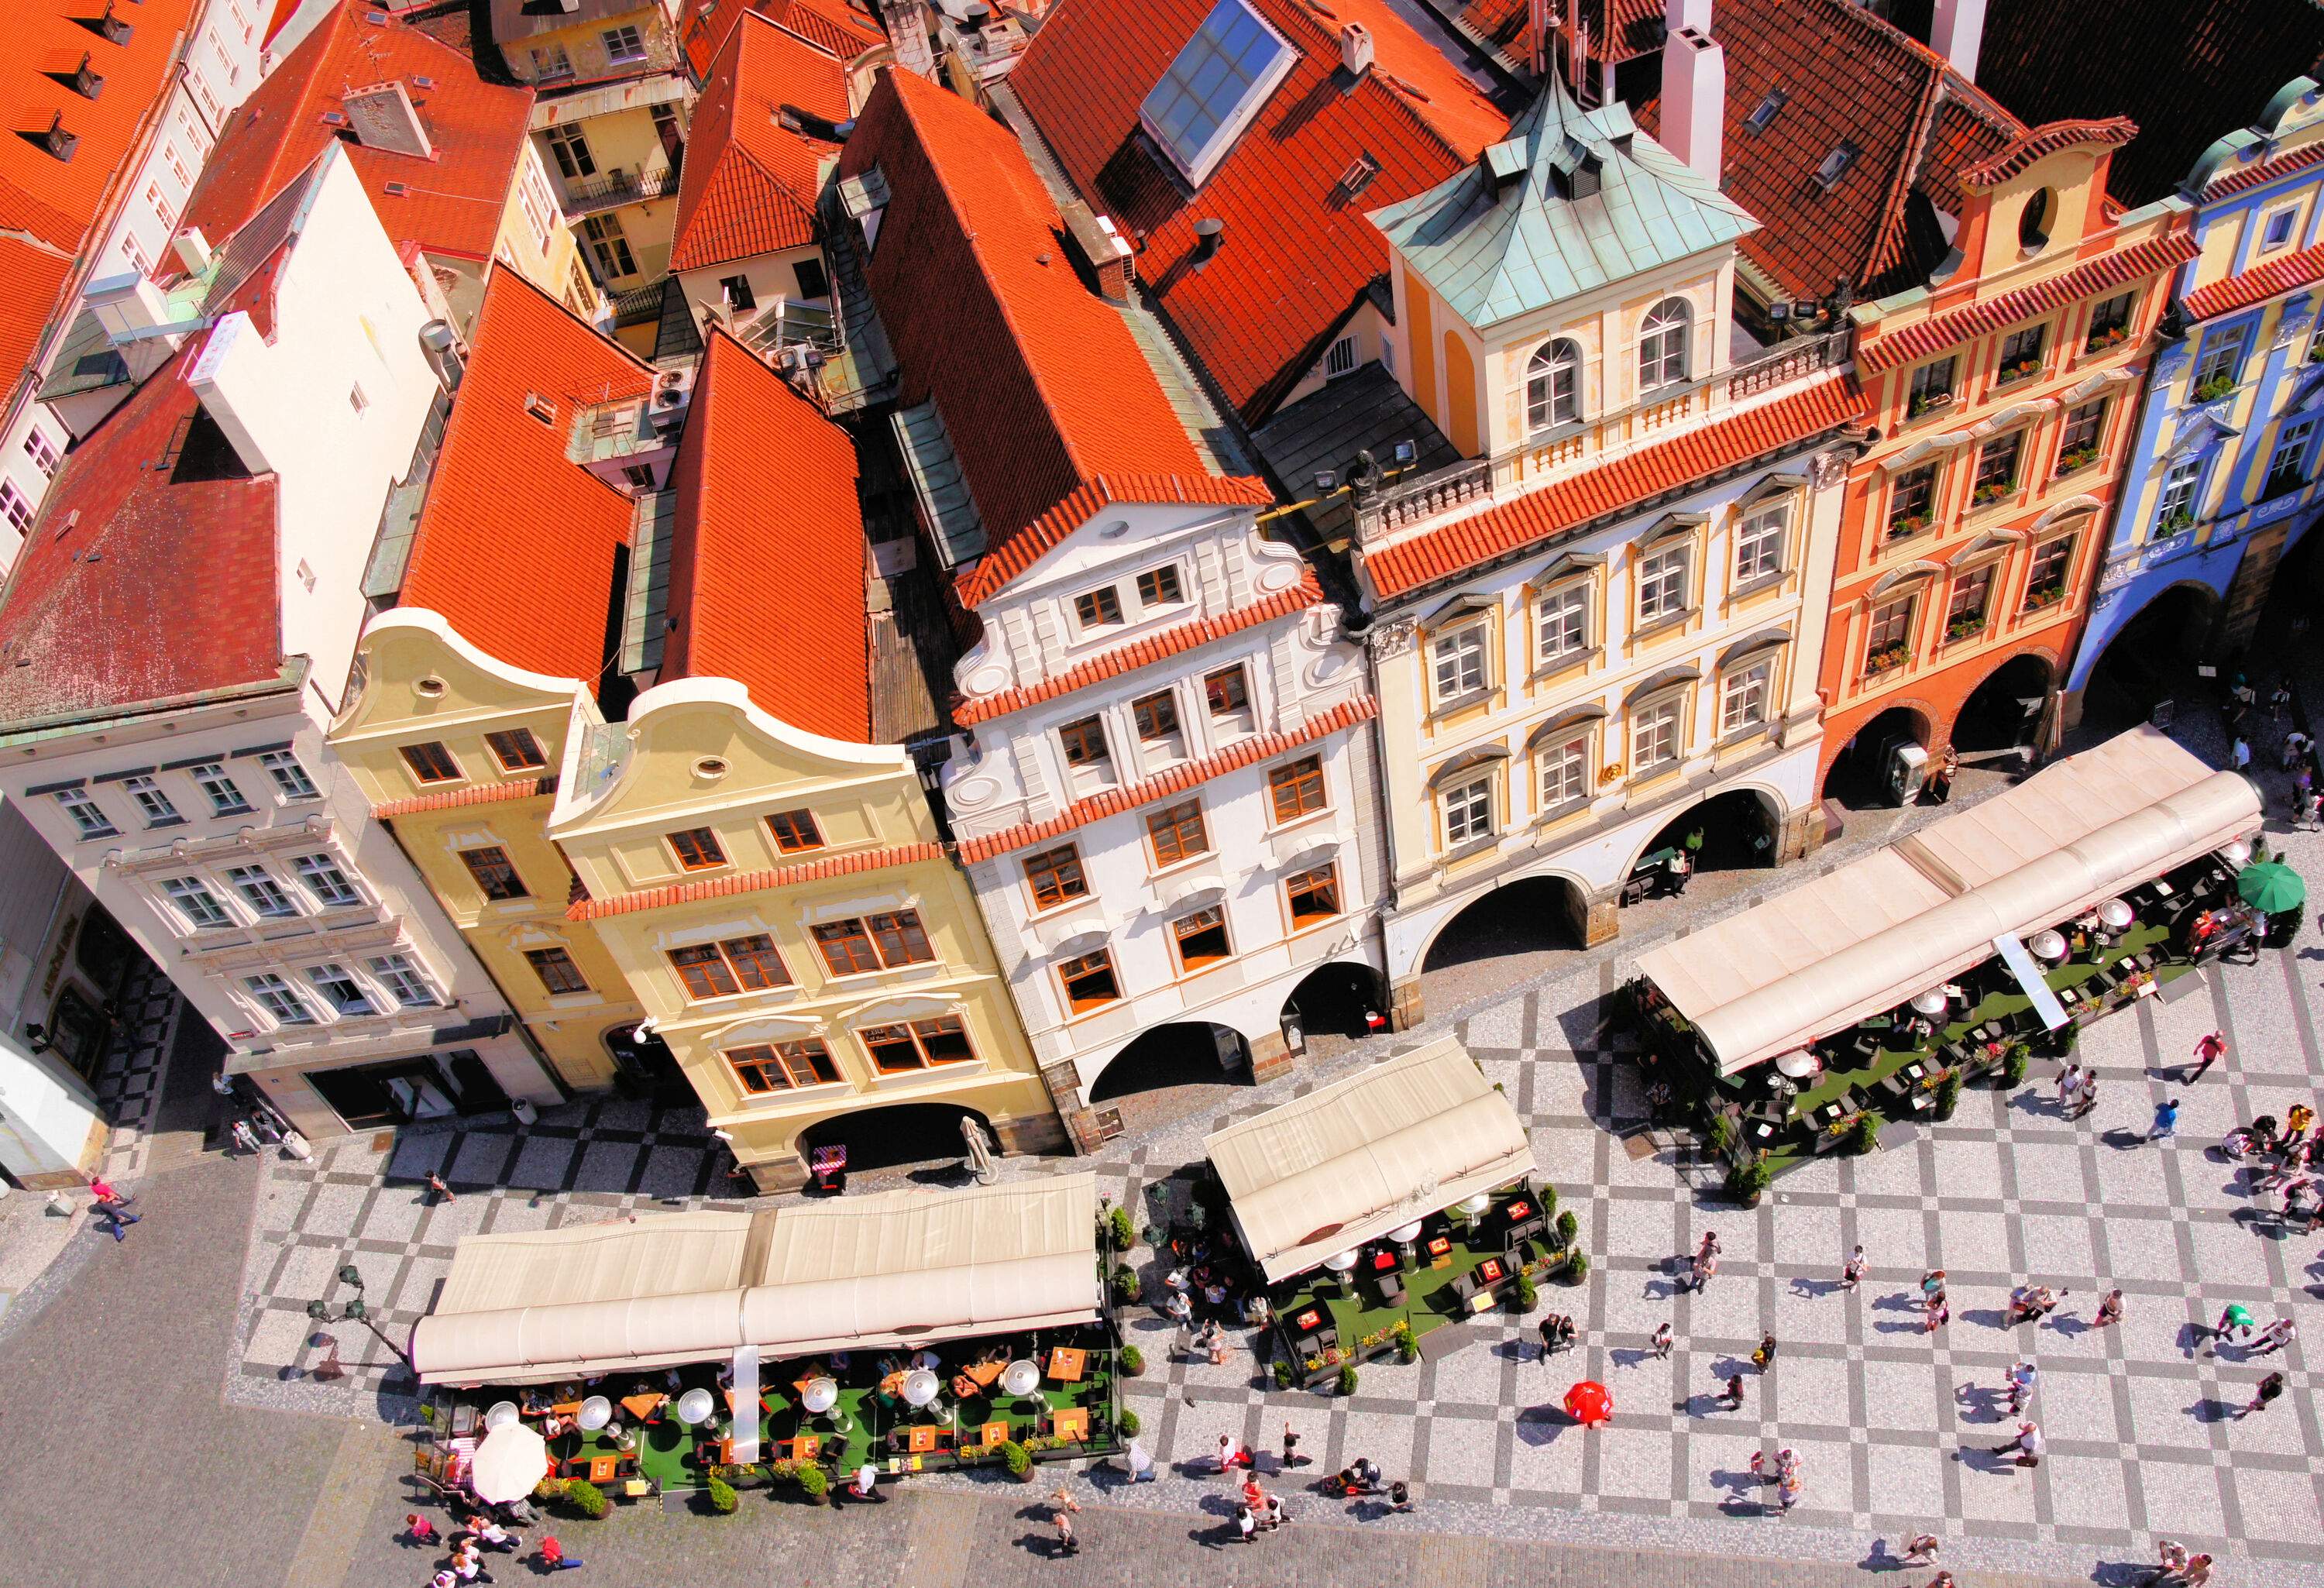 A captivating aerial top view of a crowd in an old town square encircled by stunning classic buildings featuring red brick roofs.